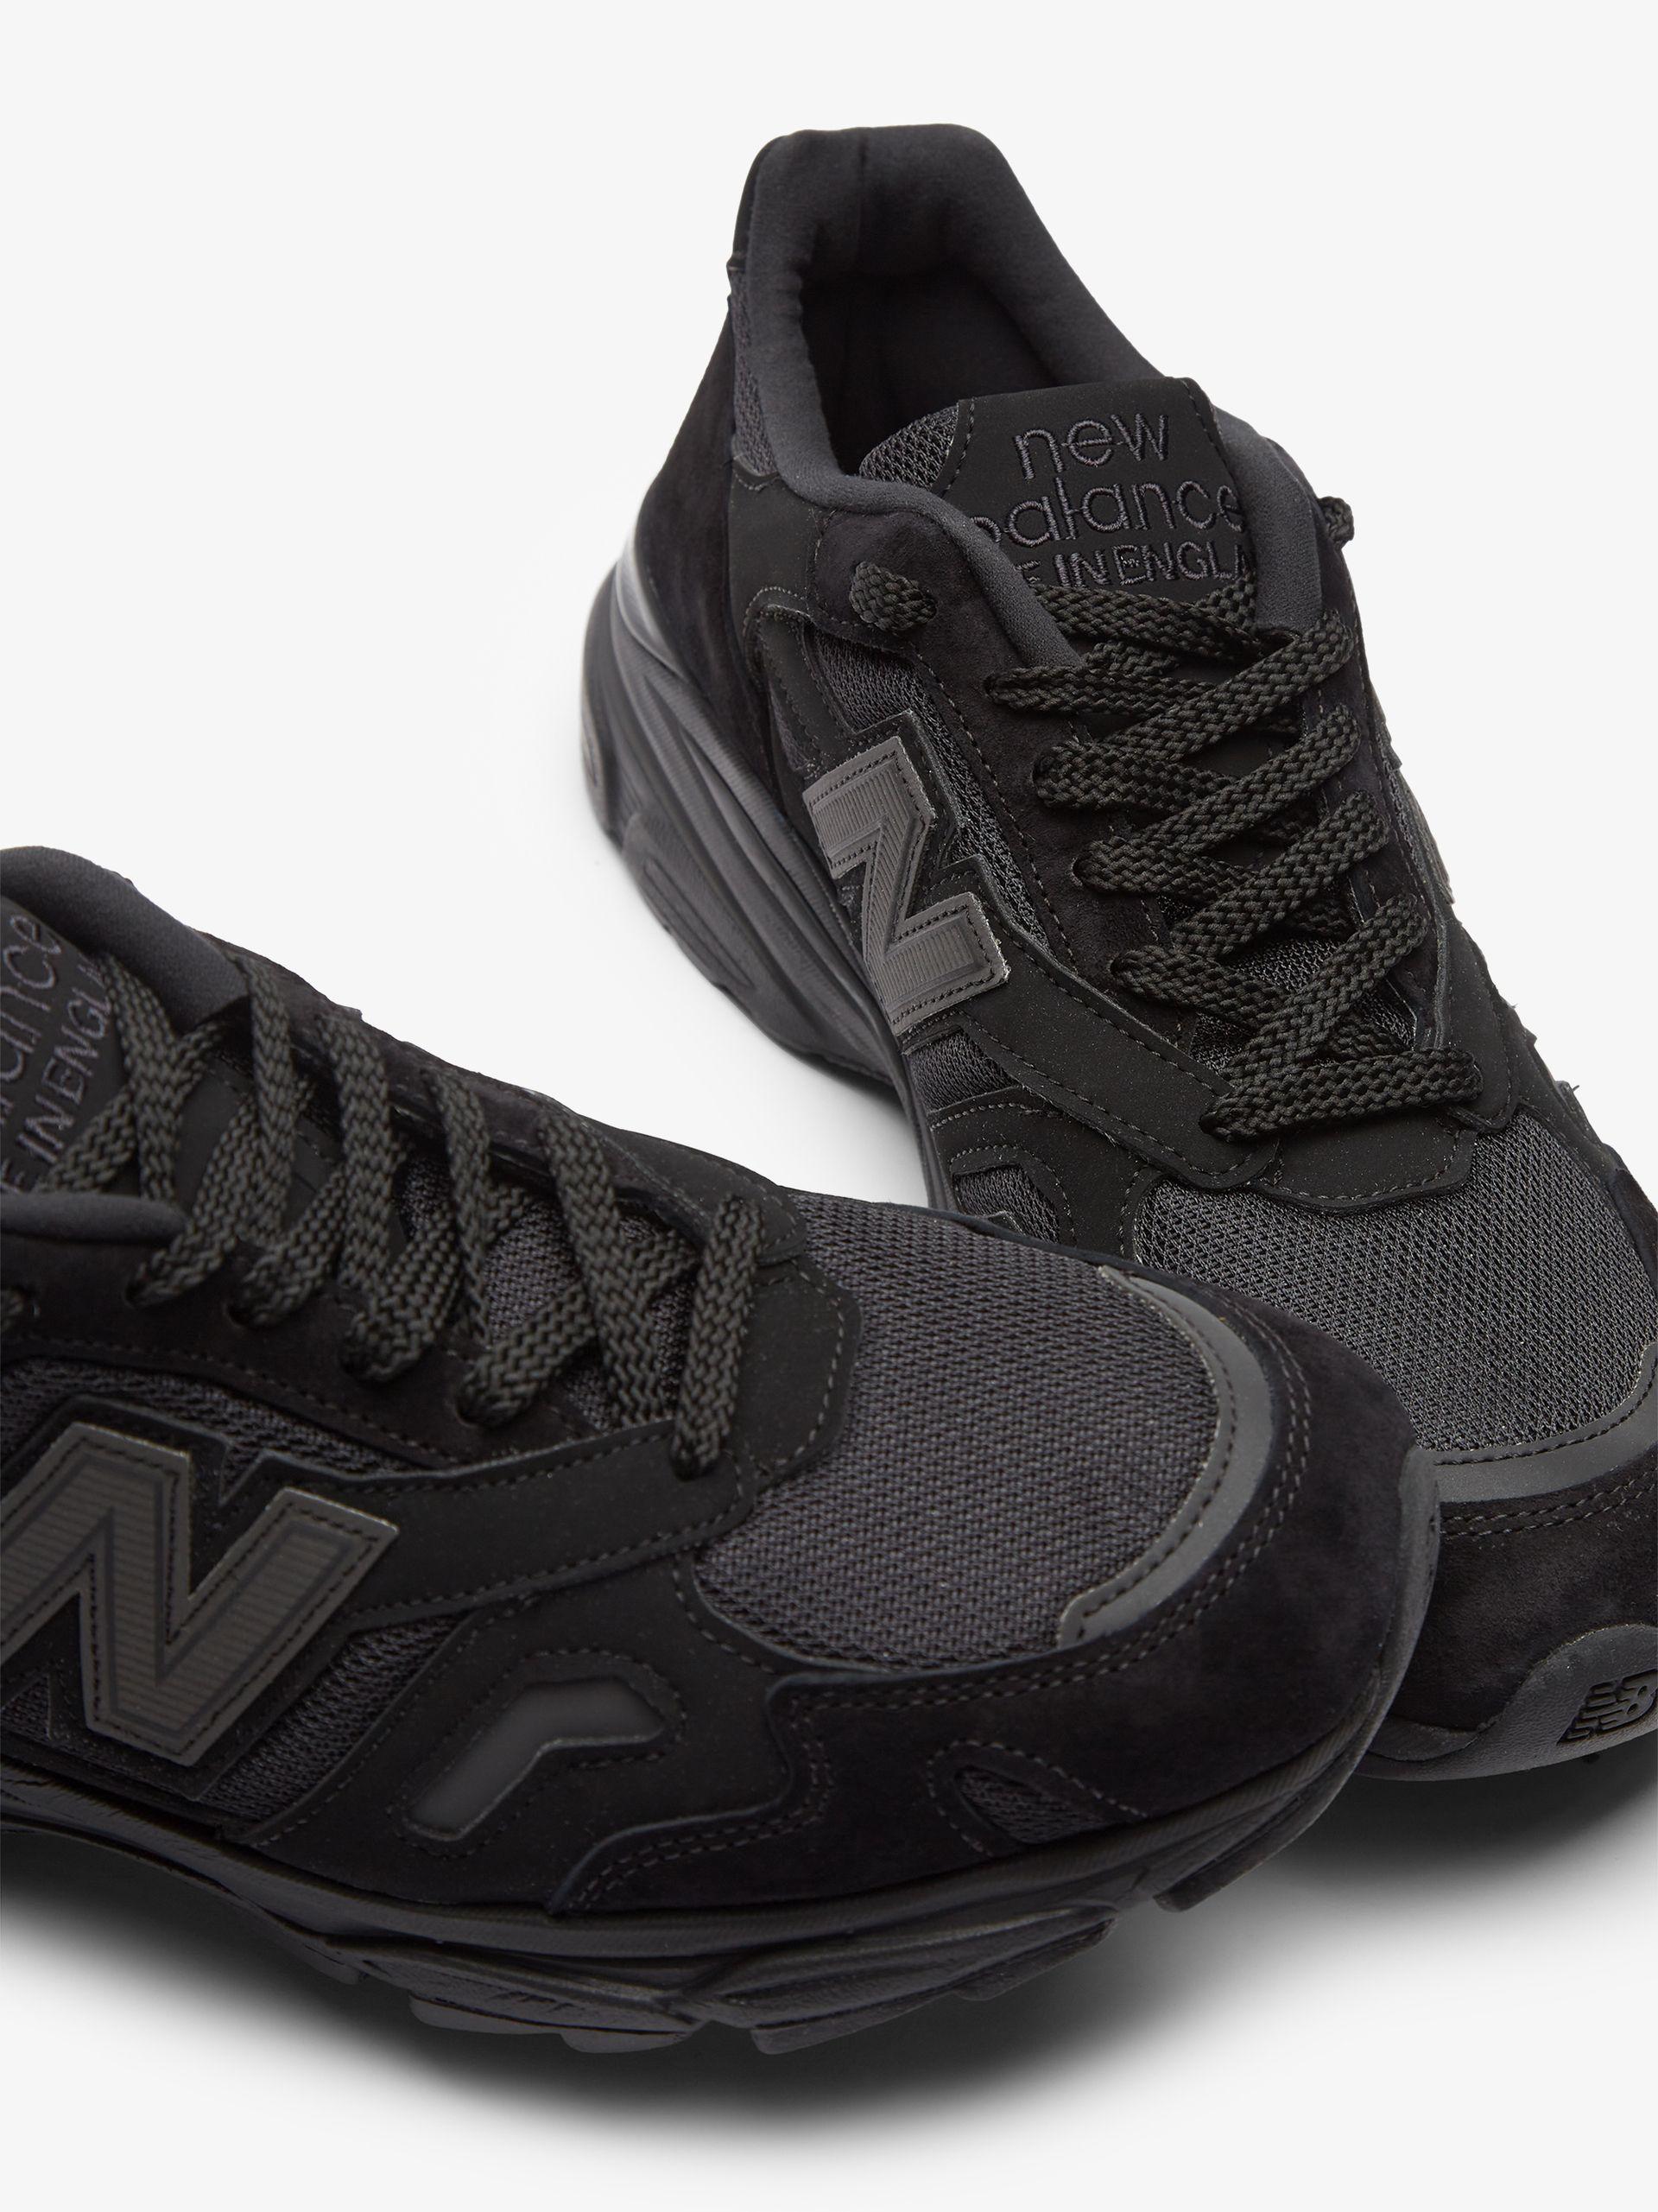 New Balance Made In Uk 920 Low Sneakers in Black for | Lyst